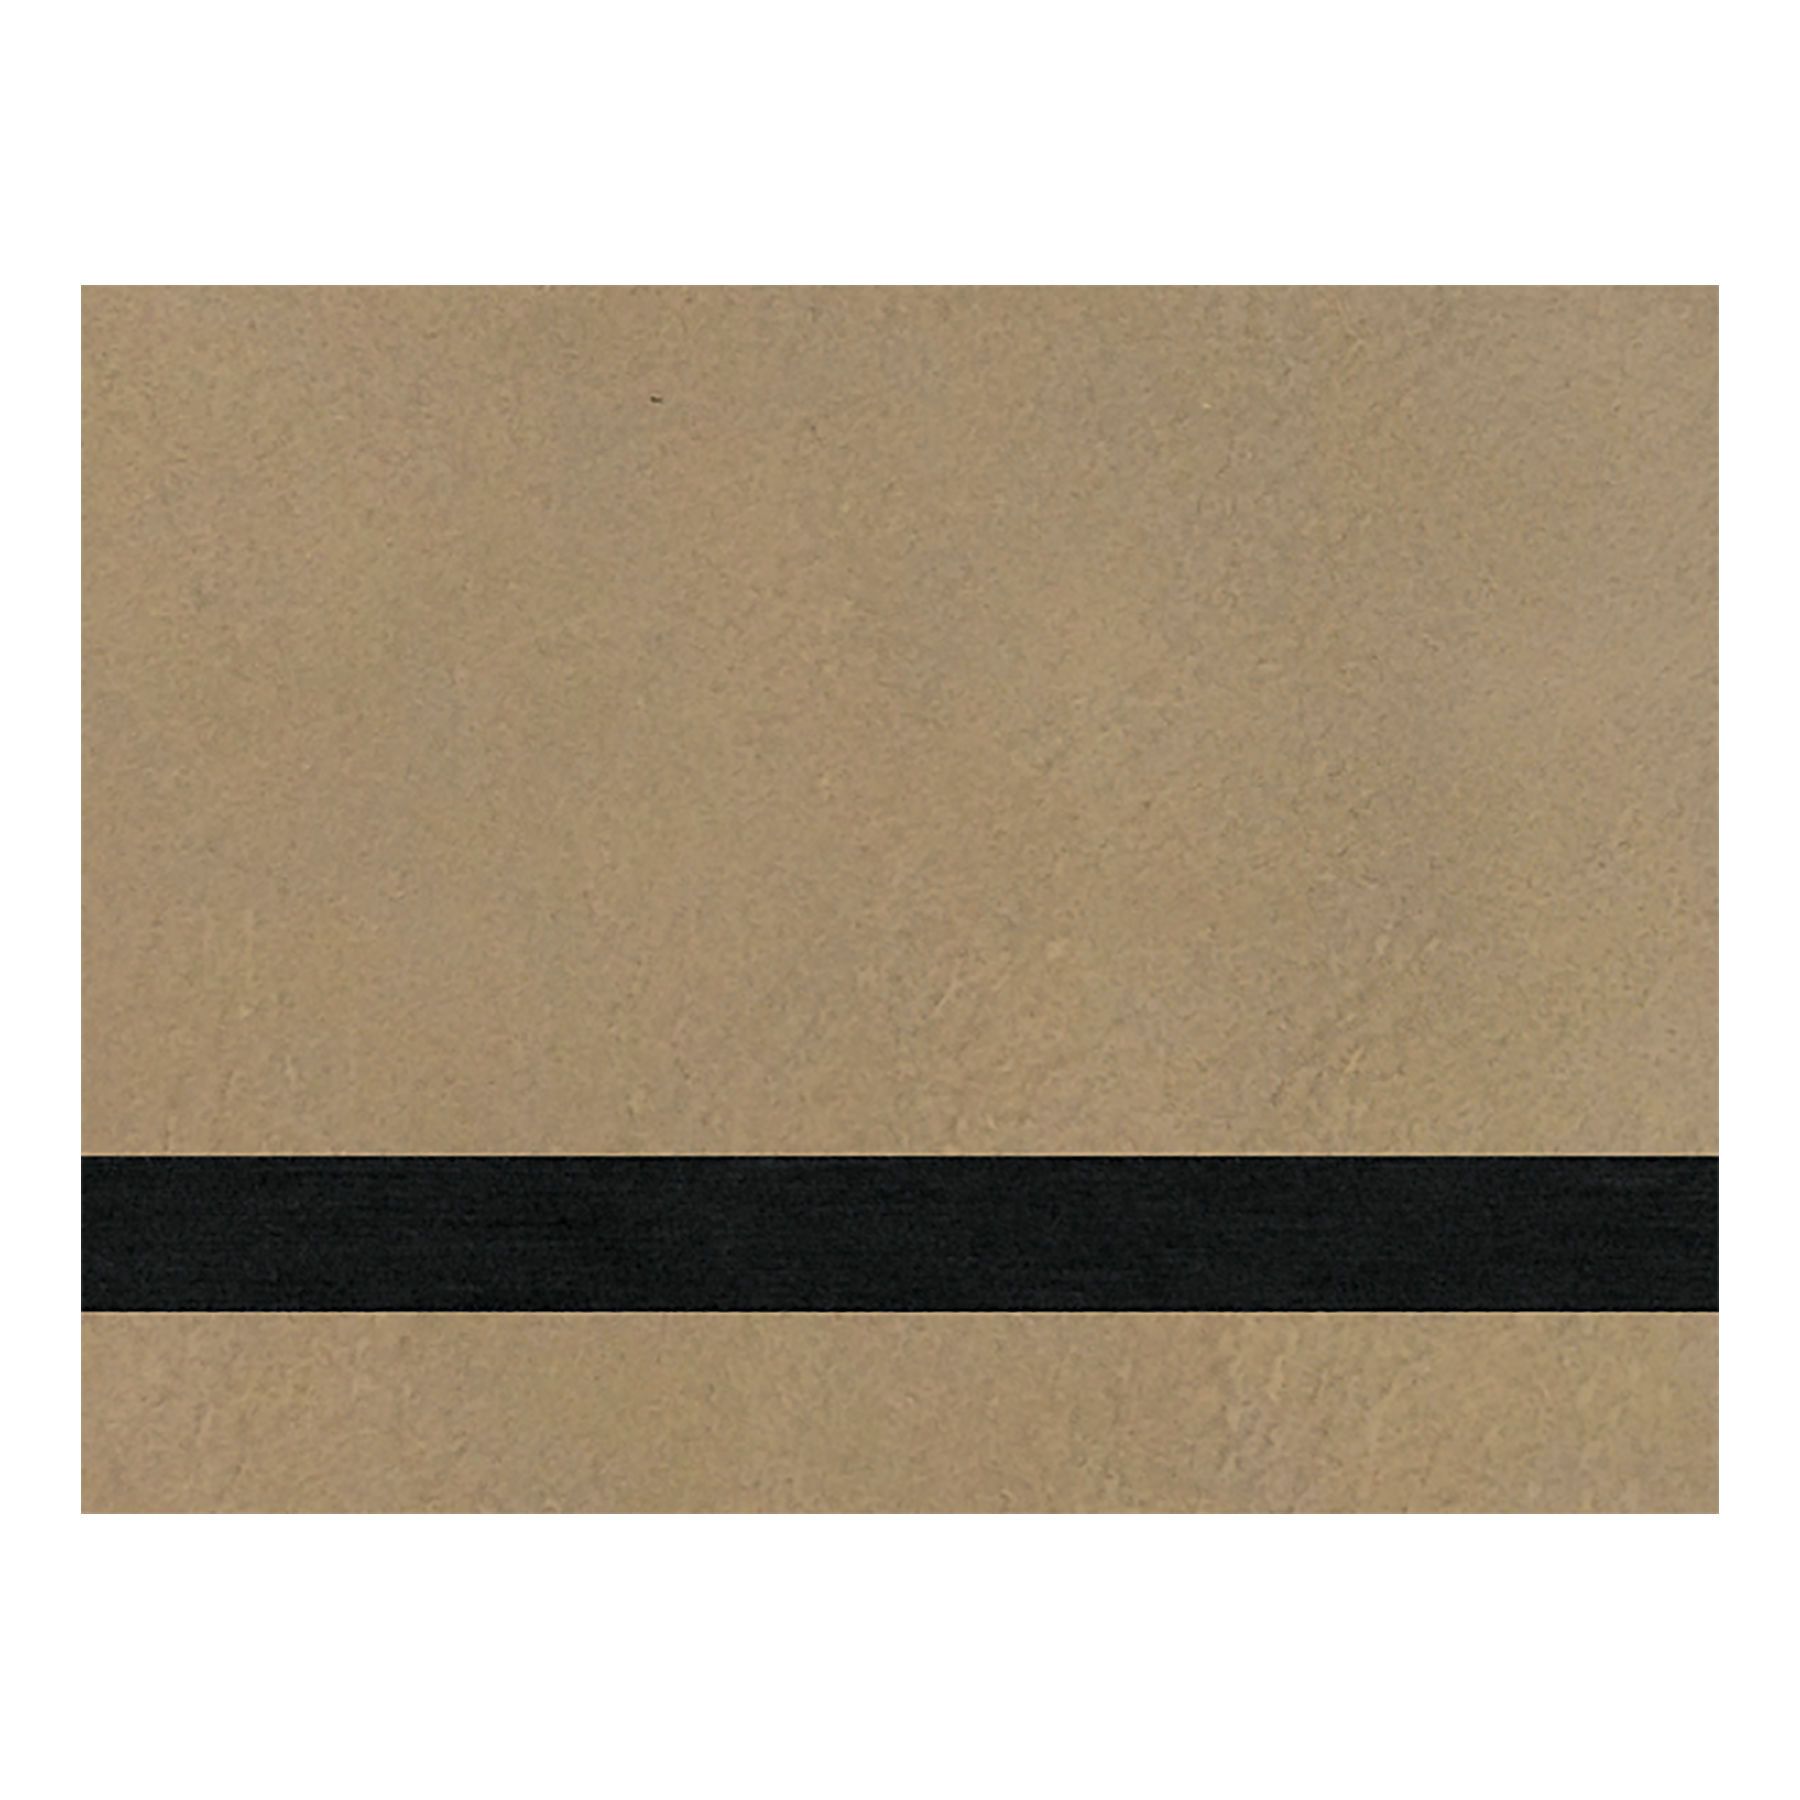 PRE-ORDER! Full Size Laserable Leatherette Sheet Stock, Epilog Fusion Edge Laser Engravers (Available Jan. 2022) Engraving Supplies Craftworks NW Fusion Edge 24 (24" x 24") Light Brown/Black 